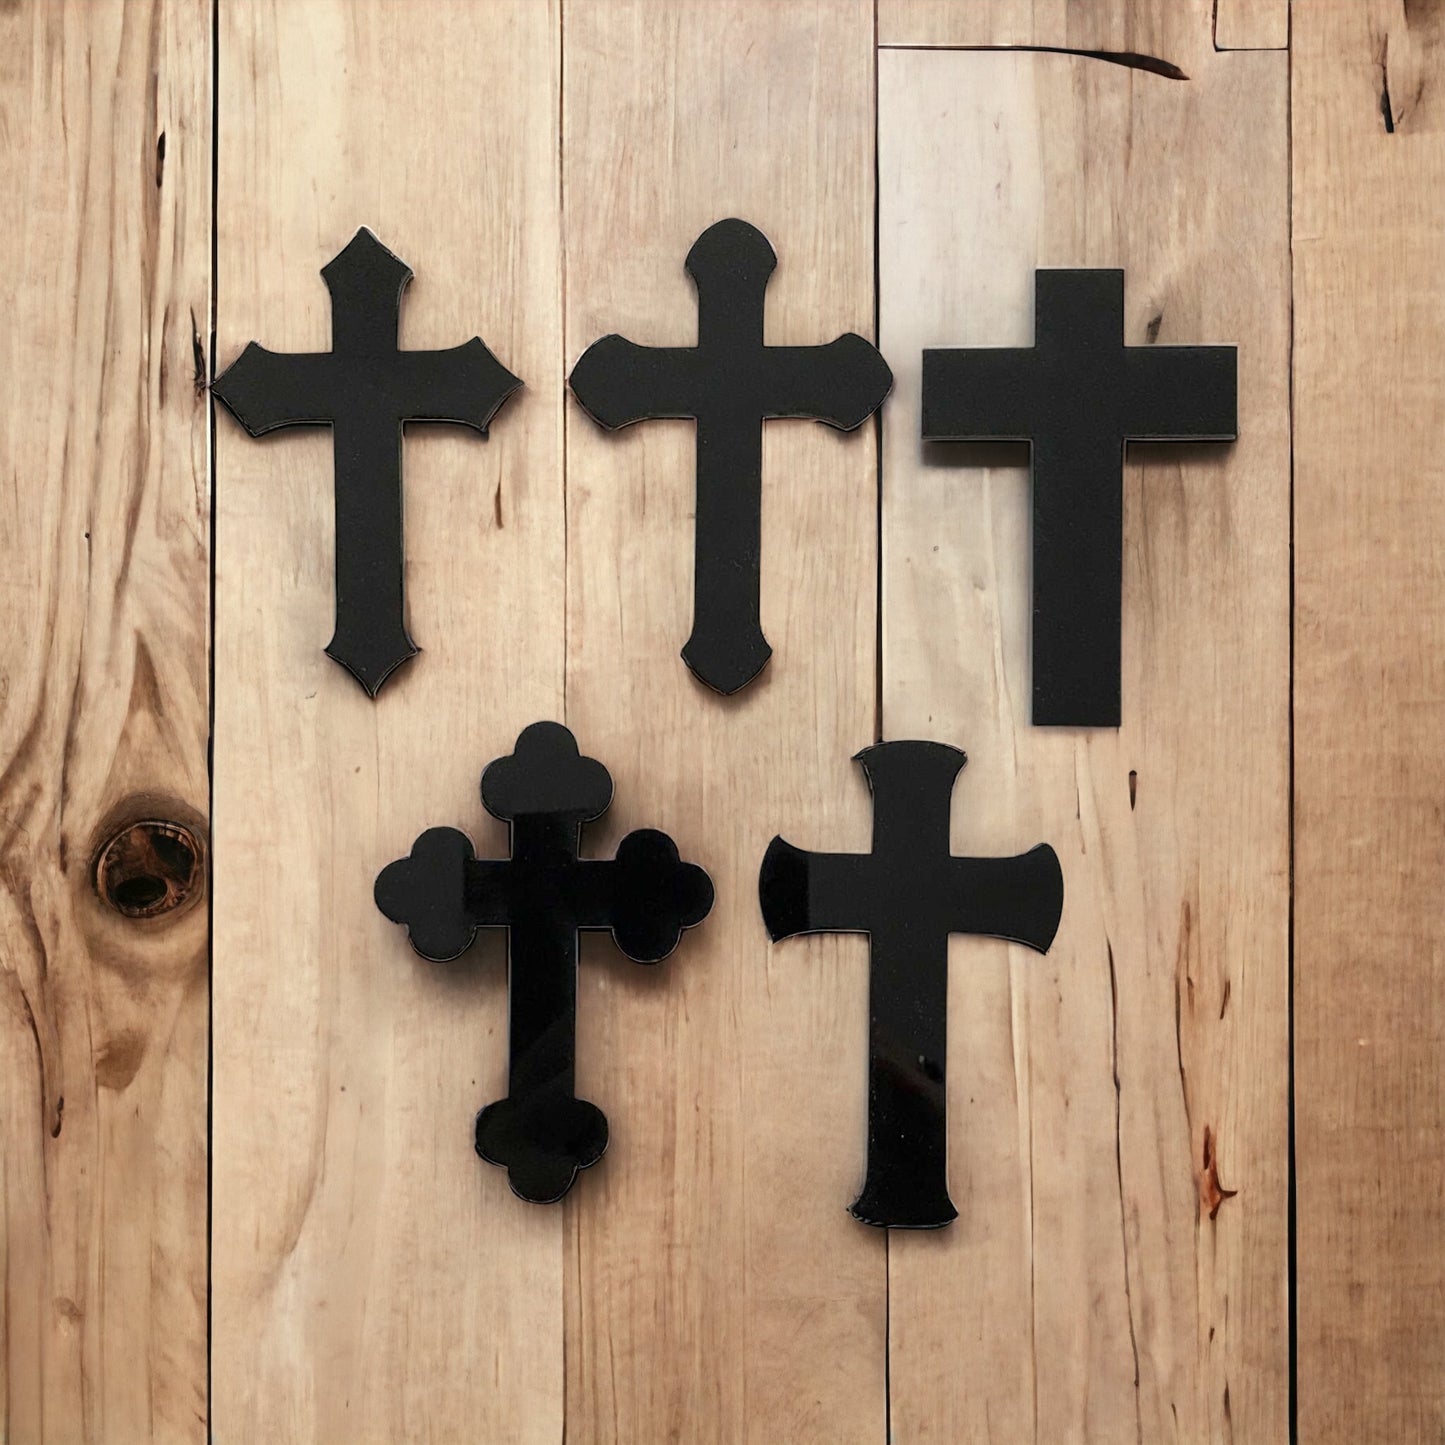 Cross Set of 5 Vintage Black Acrylic Religious Décor - The Renmy Store Homewares & Gifts 